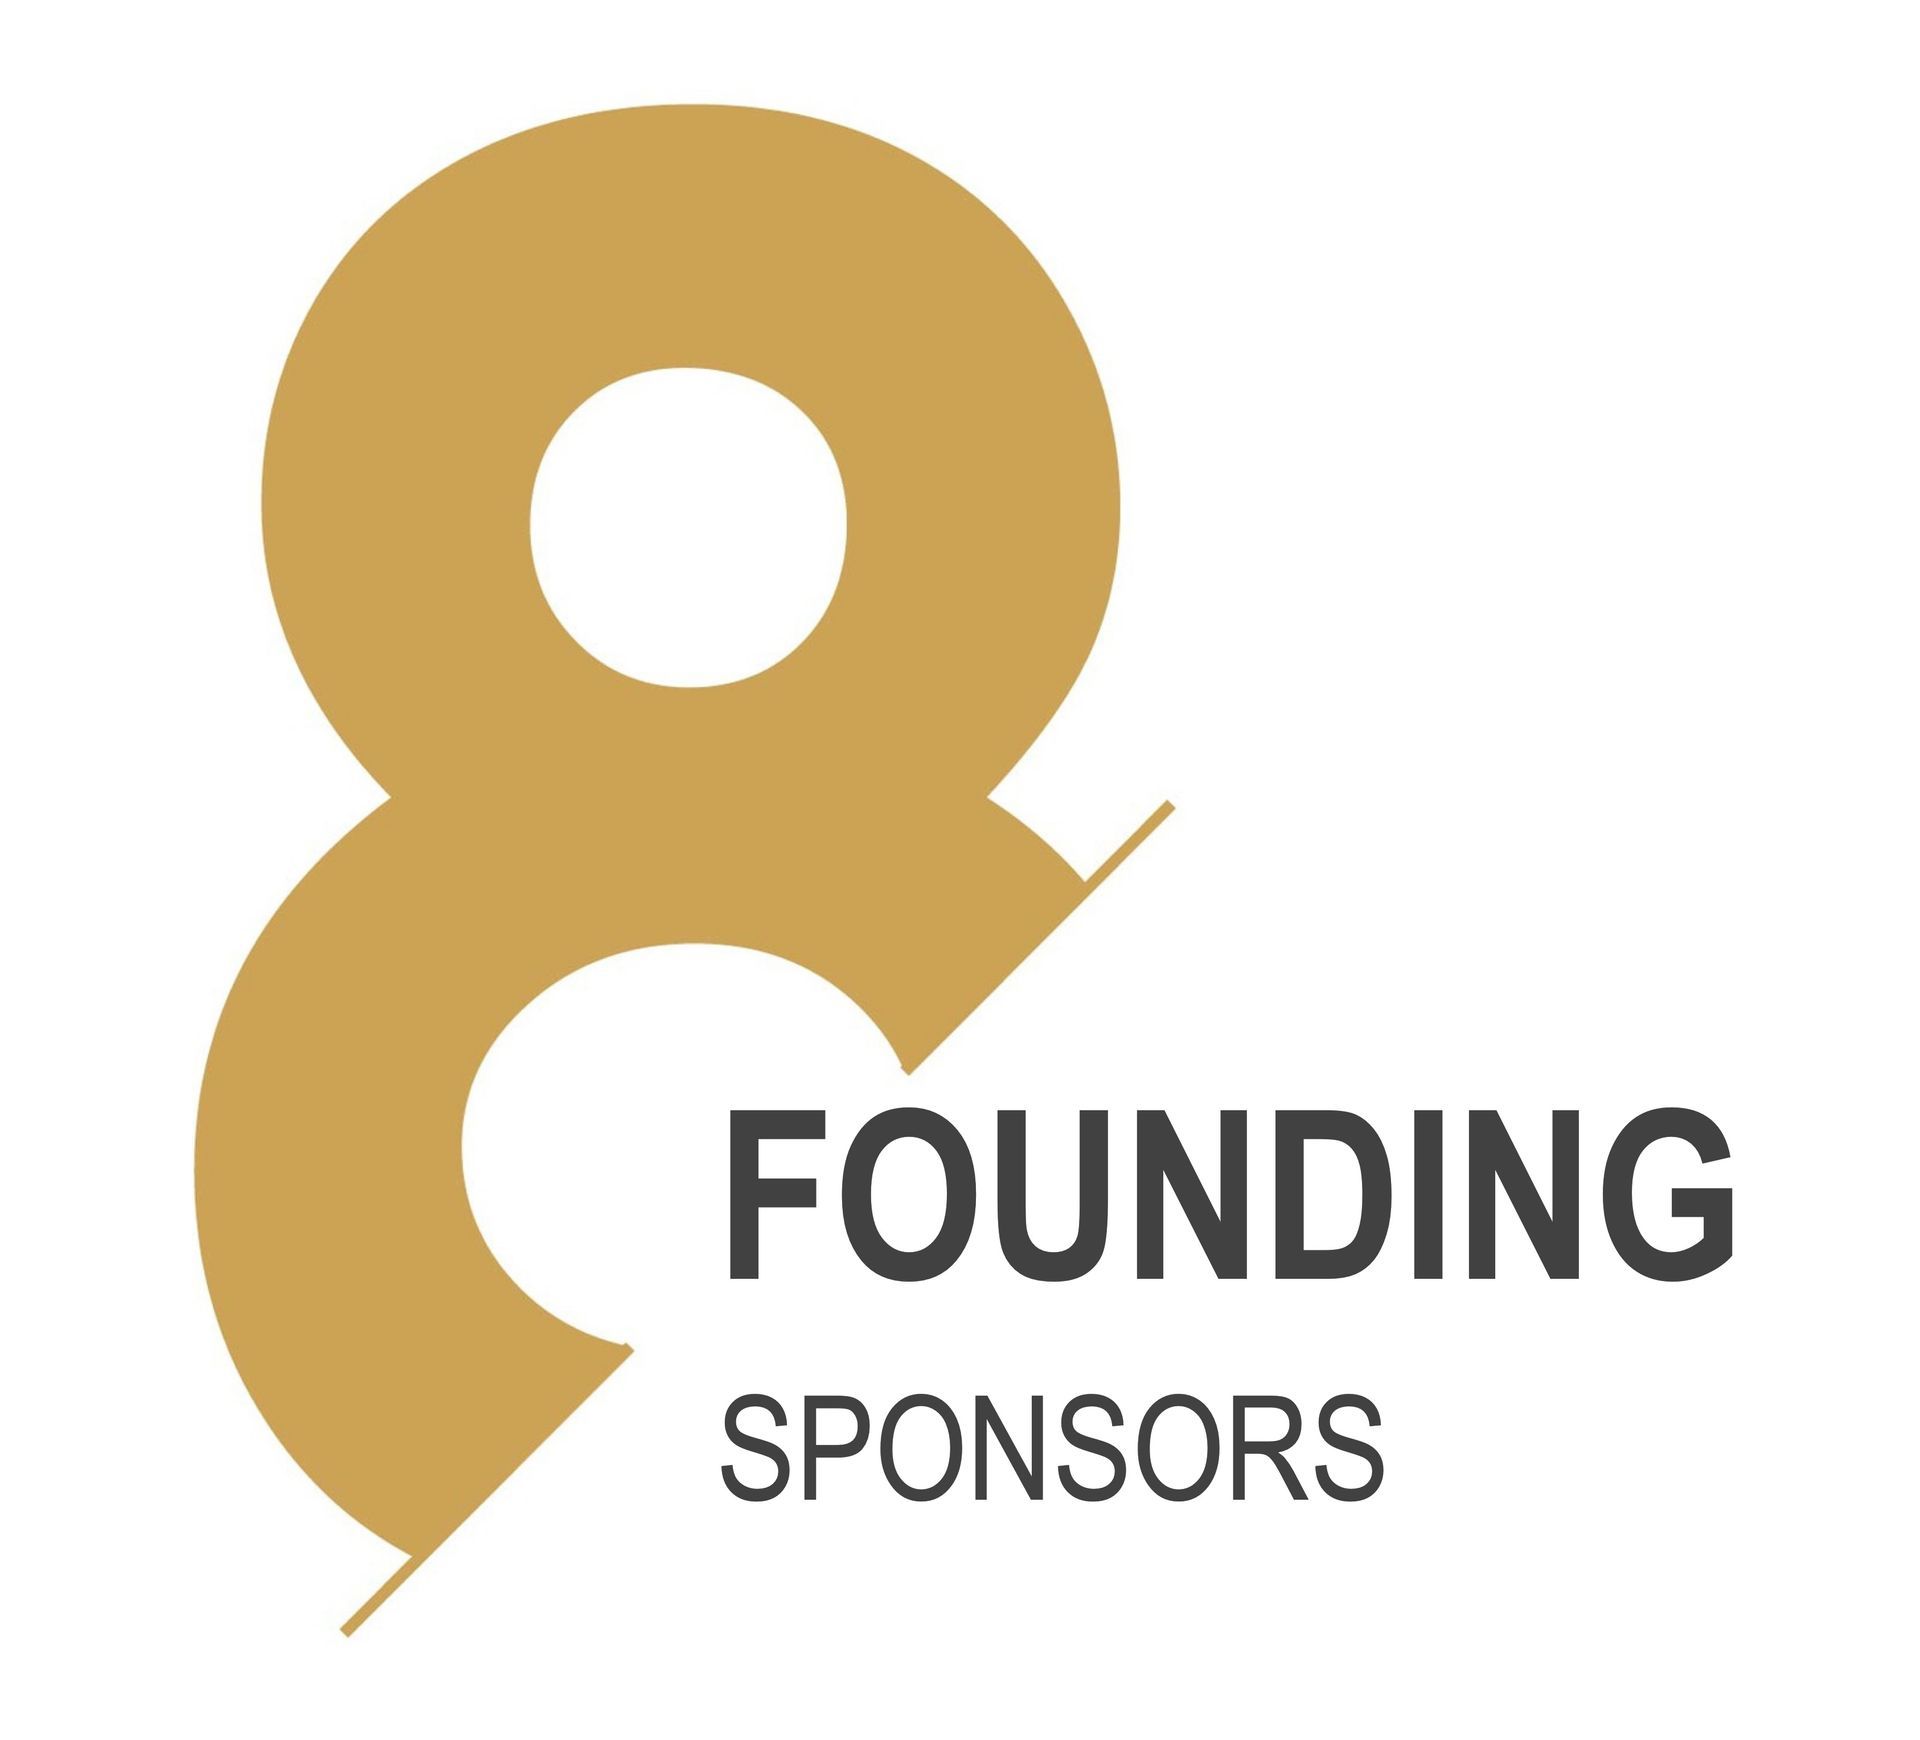 Eight Founding Sponsors by Pippily